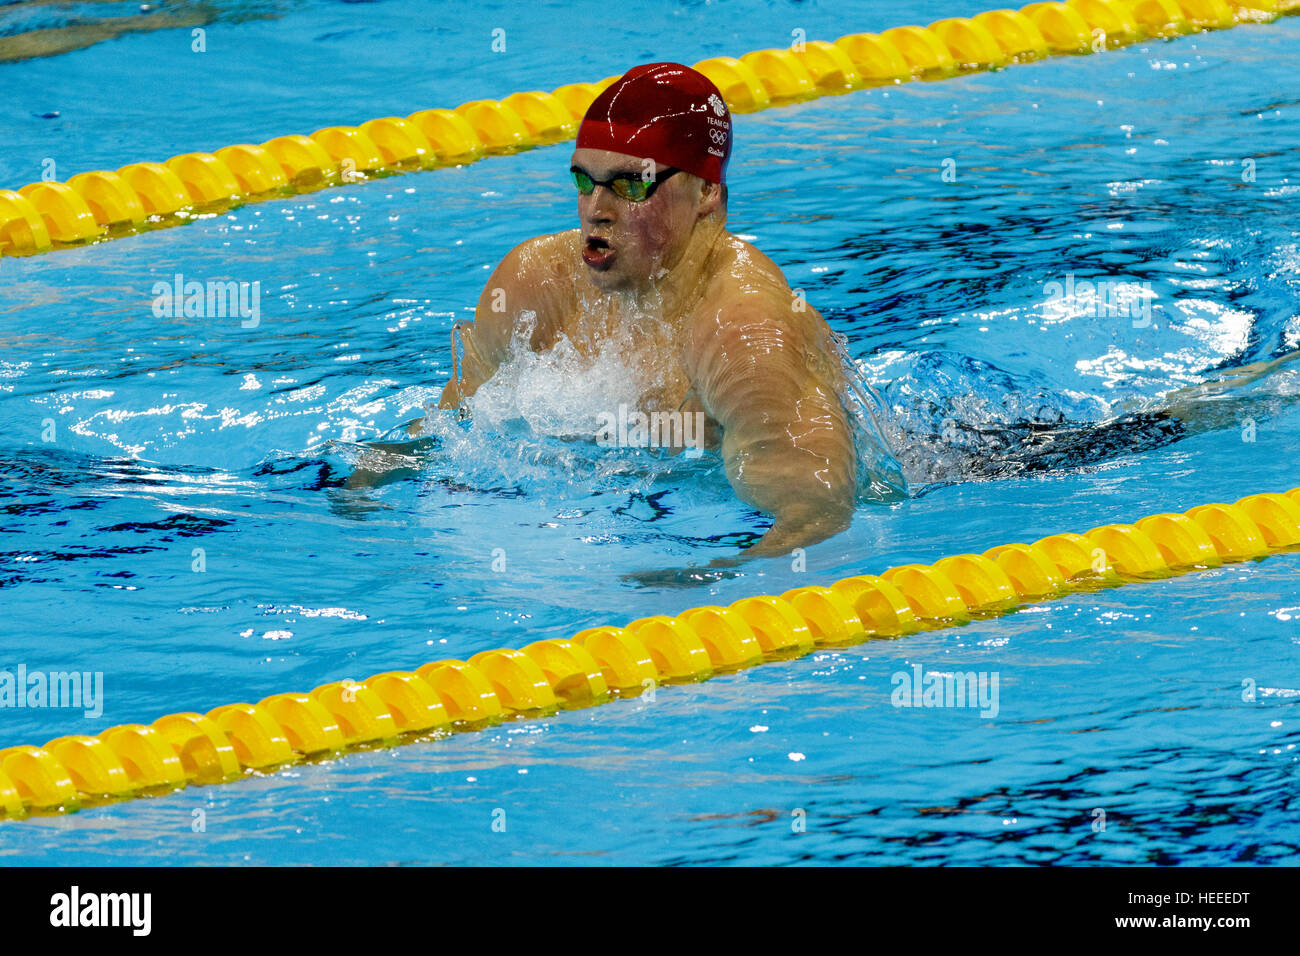 Rio de Janeiro, Brazil. 7 August 2016.   Adam Peaty (GBR) the gold medal winner of the Men's 100m Breaststroke at the 2016 Olympic Summer Games. ©Paul Stock Photo